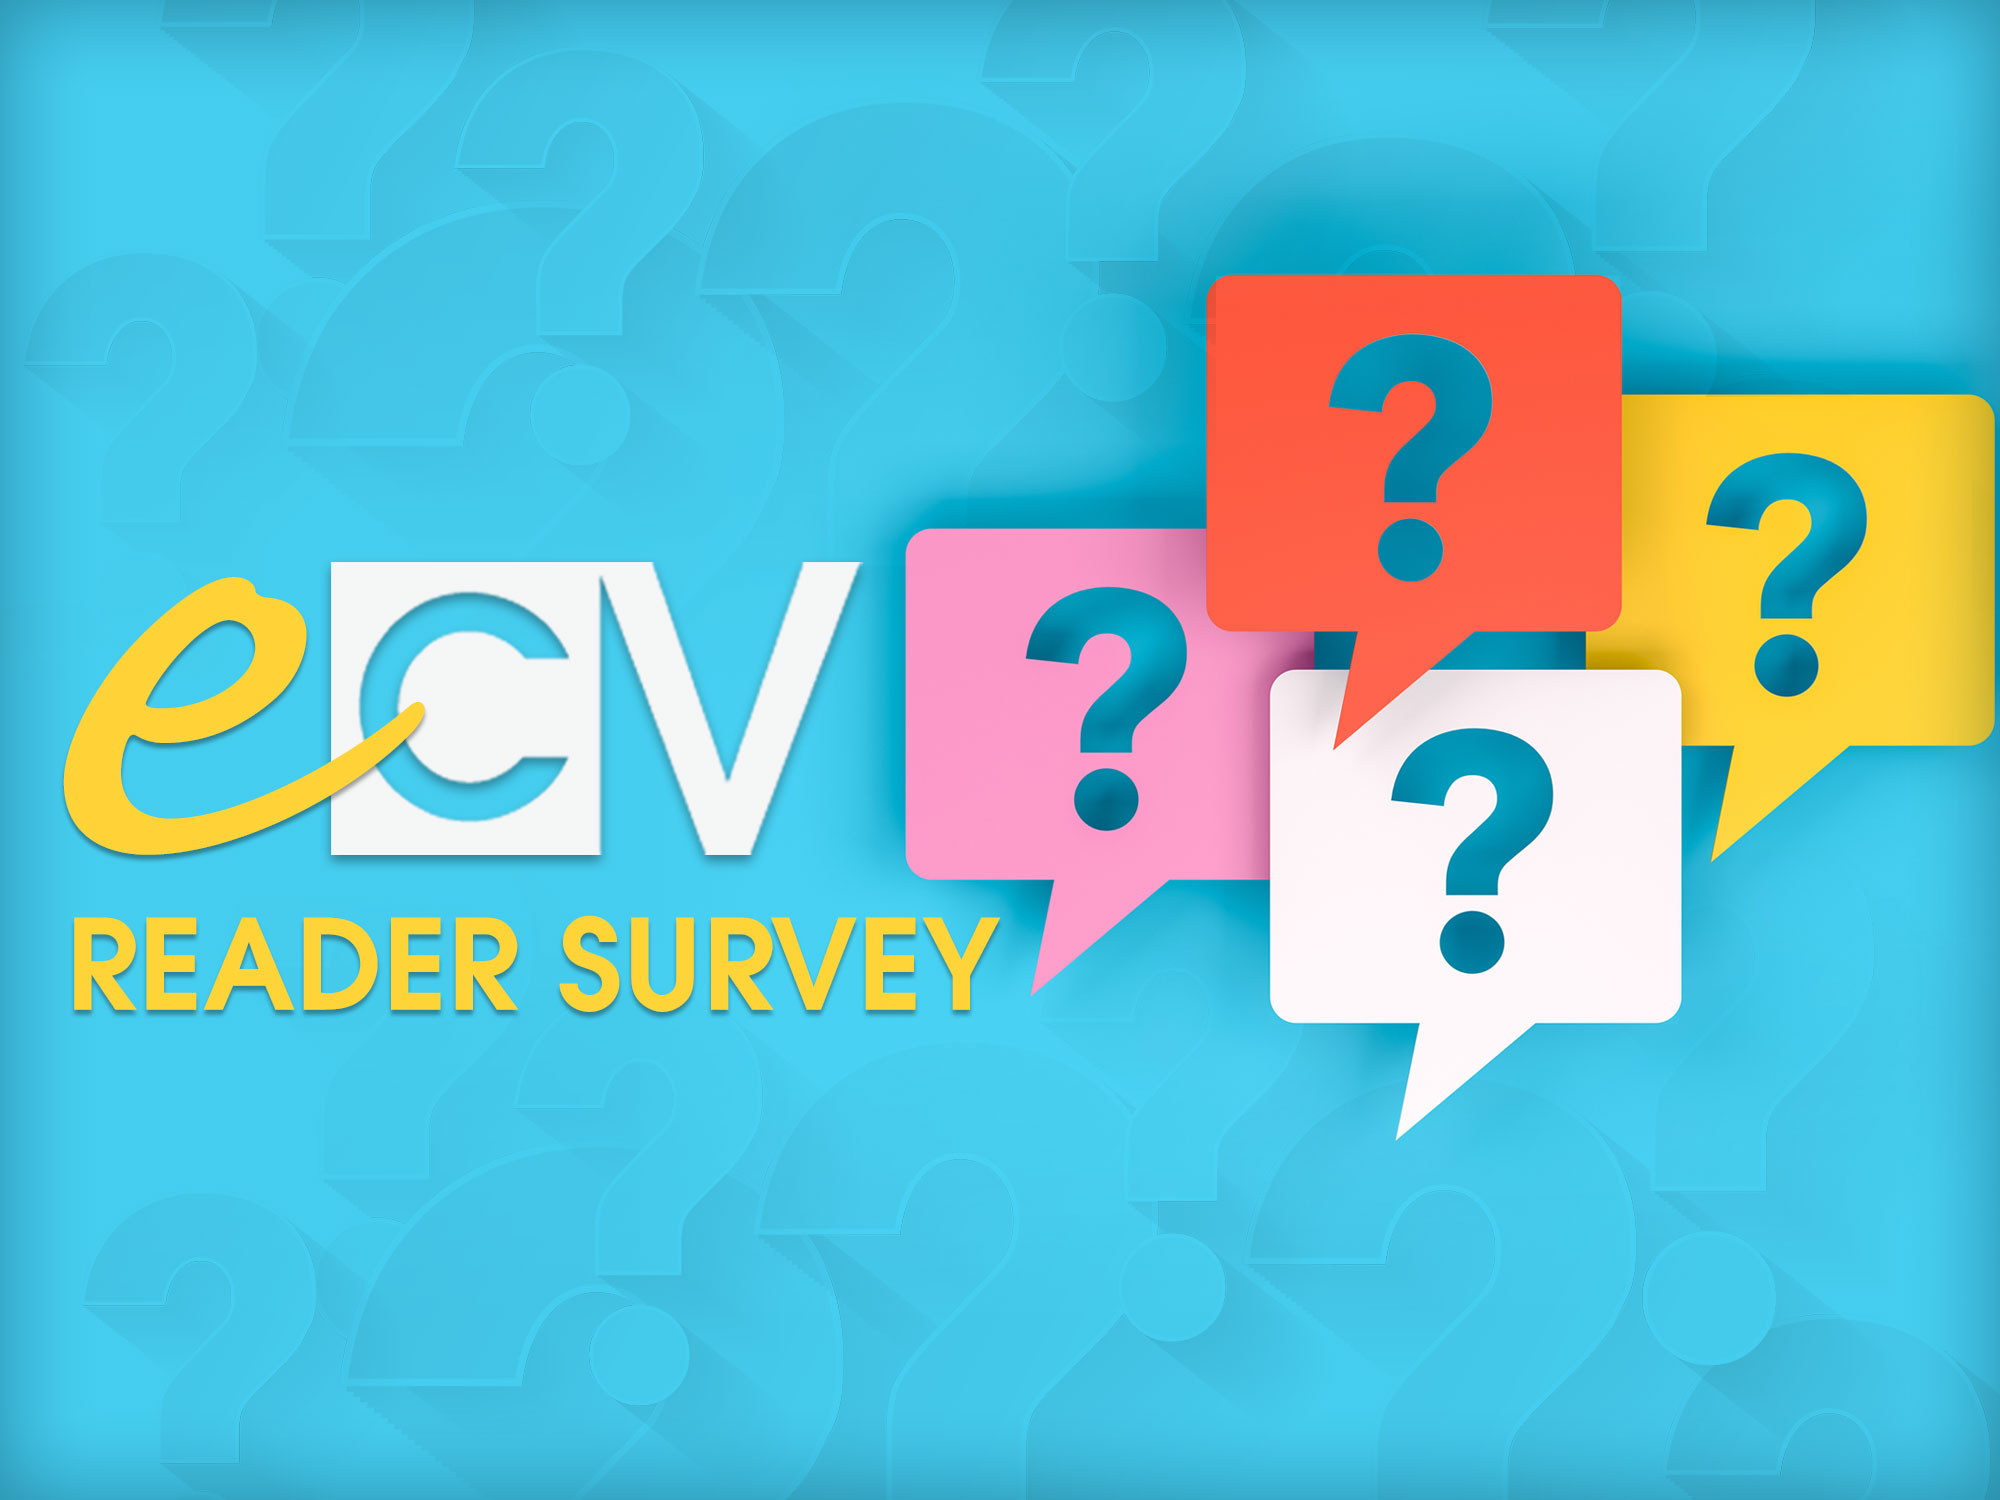 eCV Readership Survey: Last chance to let your voice be heard